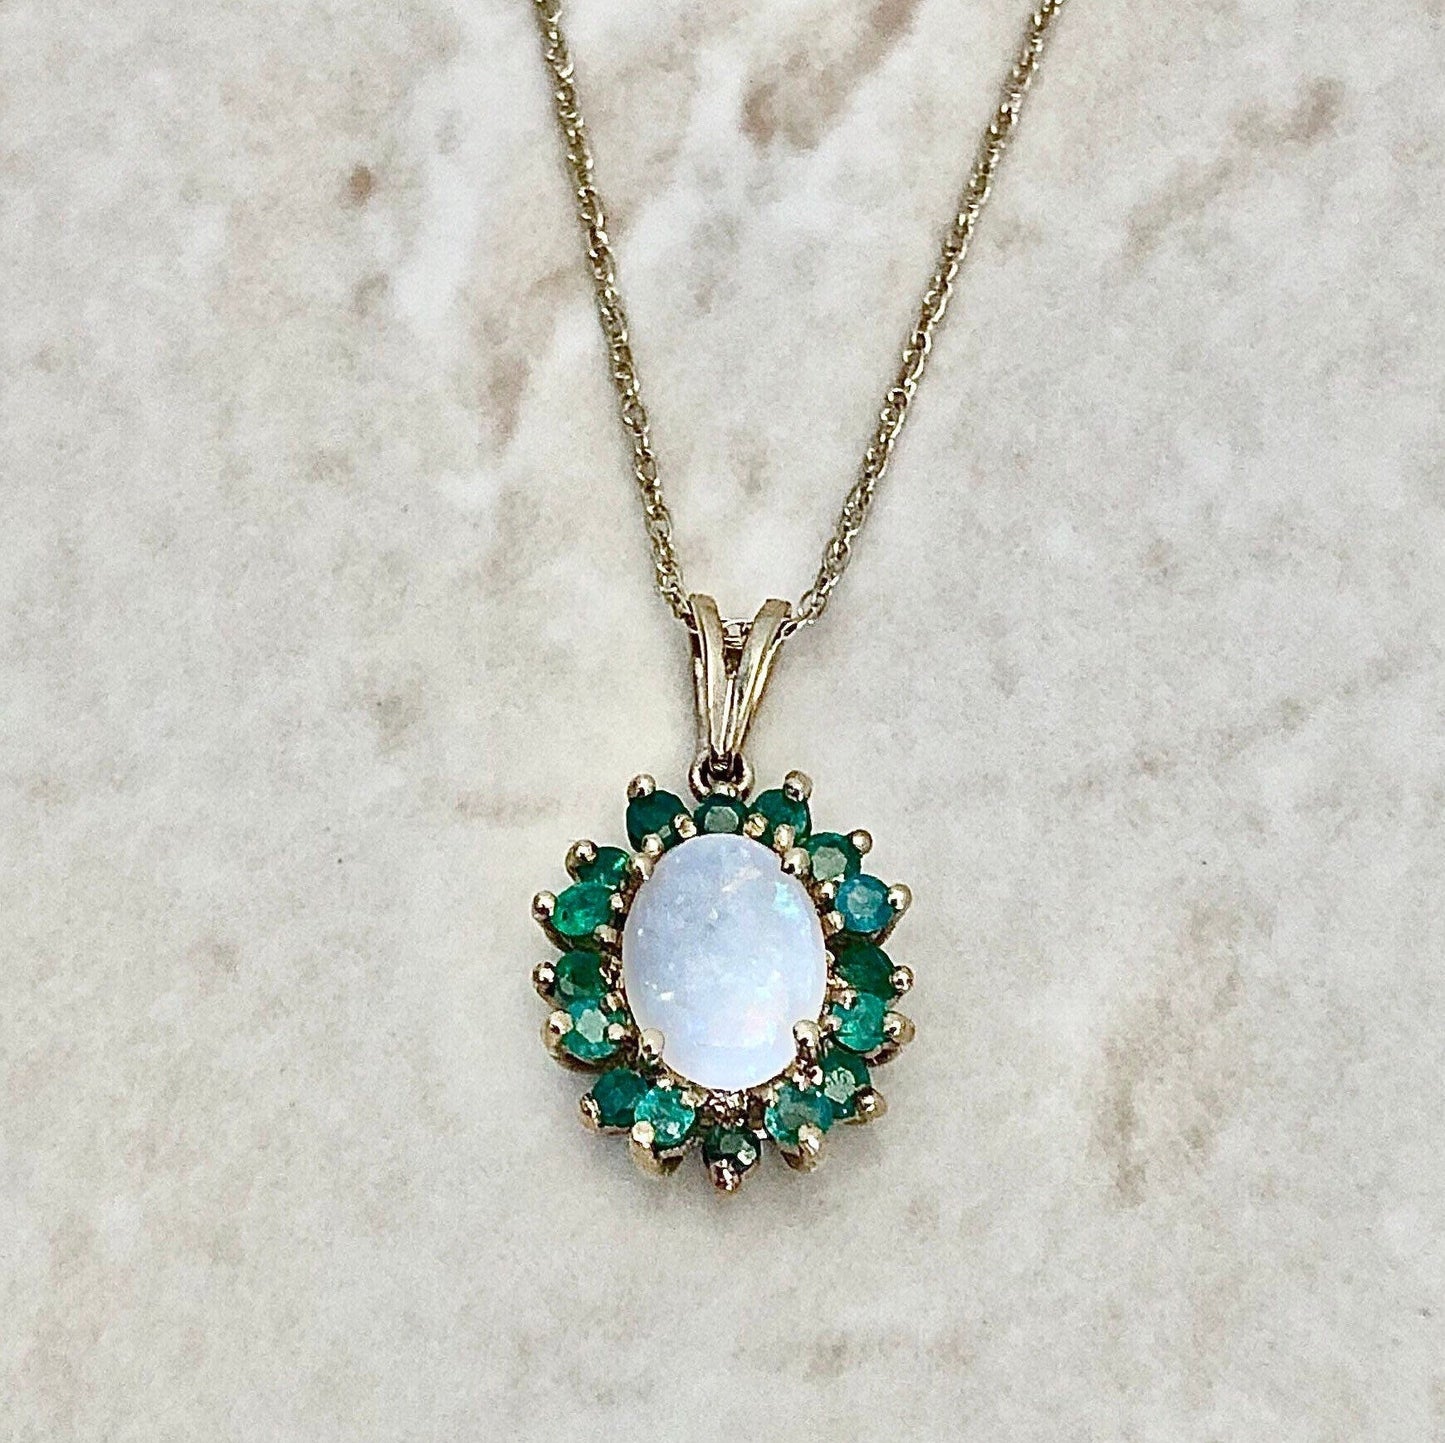 Natural Opal & Emerald Pendant Necklace - 10K Yellow Gold - May And October Birthstone - Birthday Gift For Her